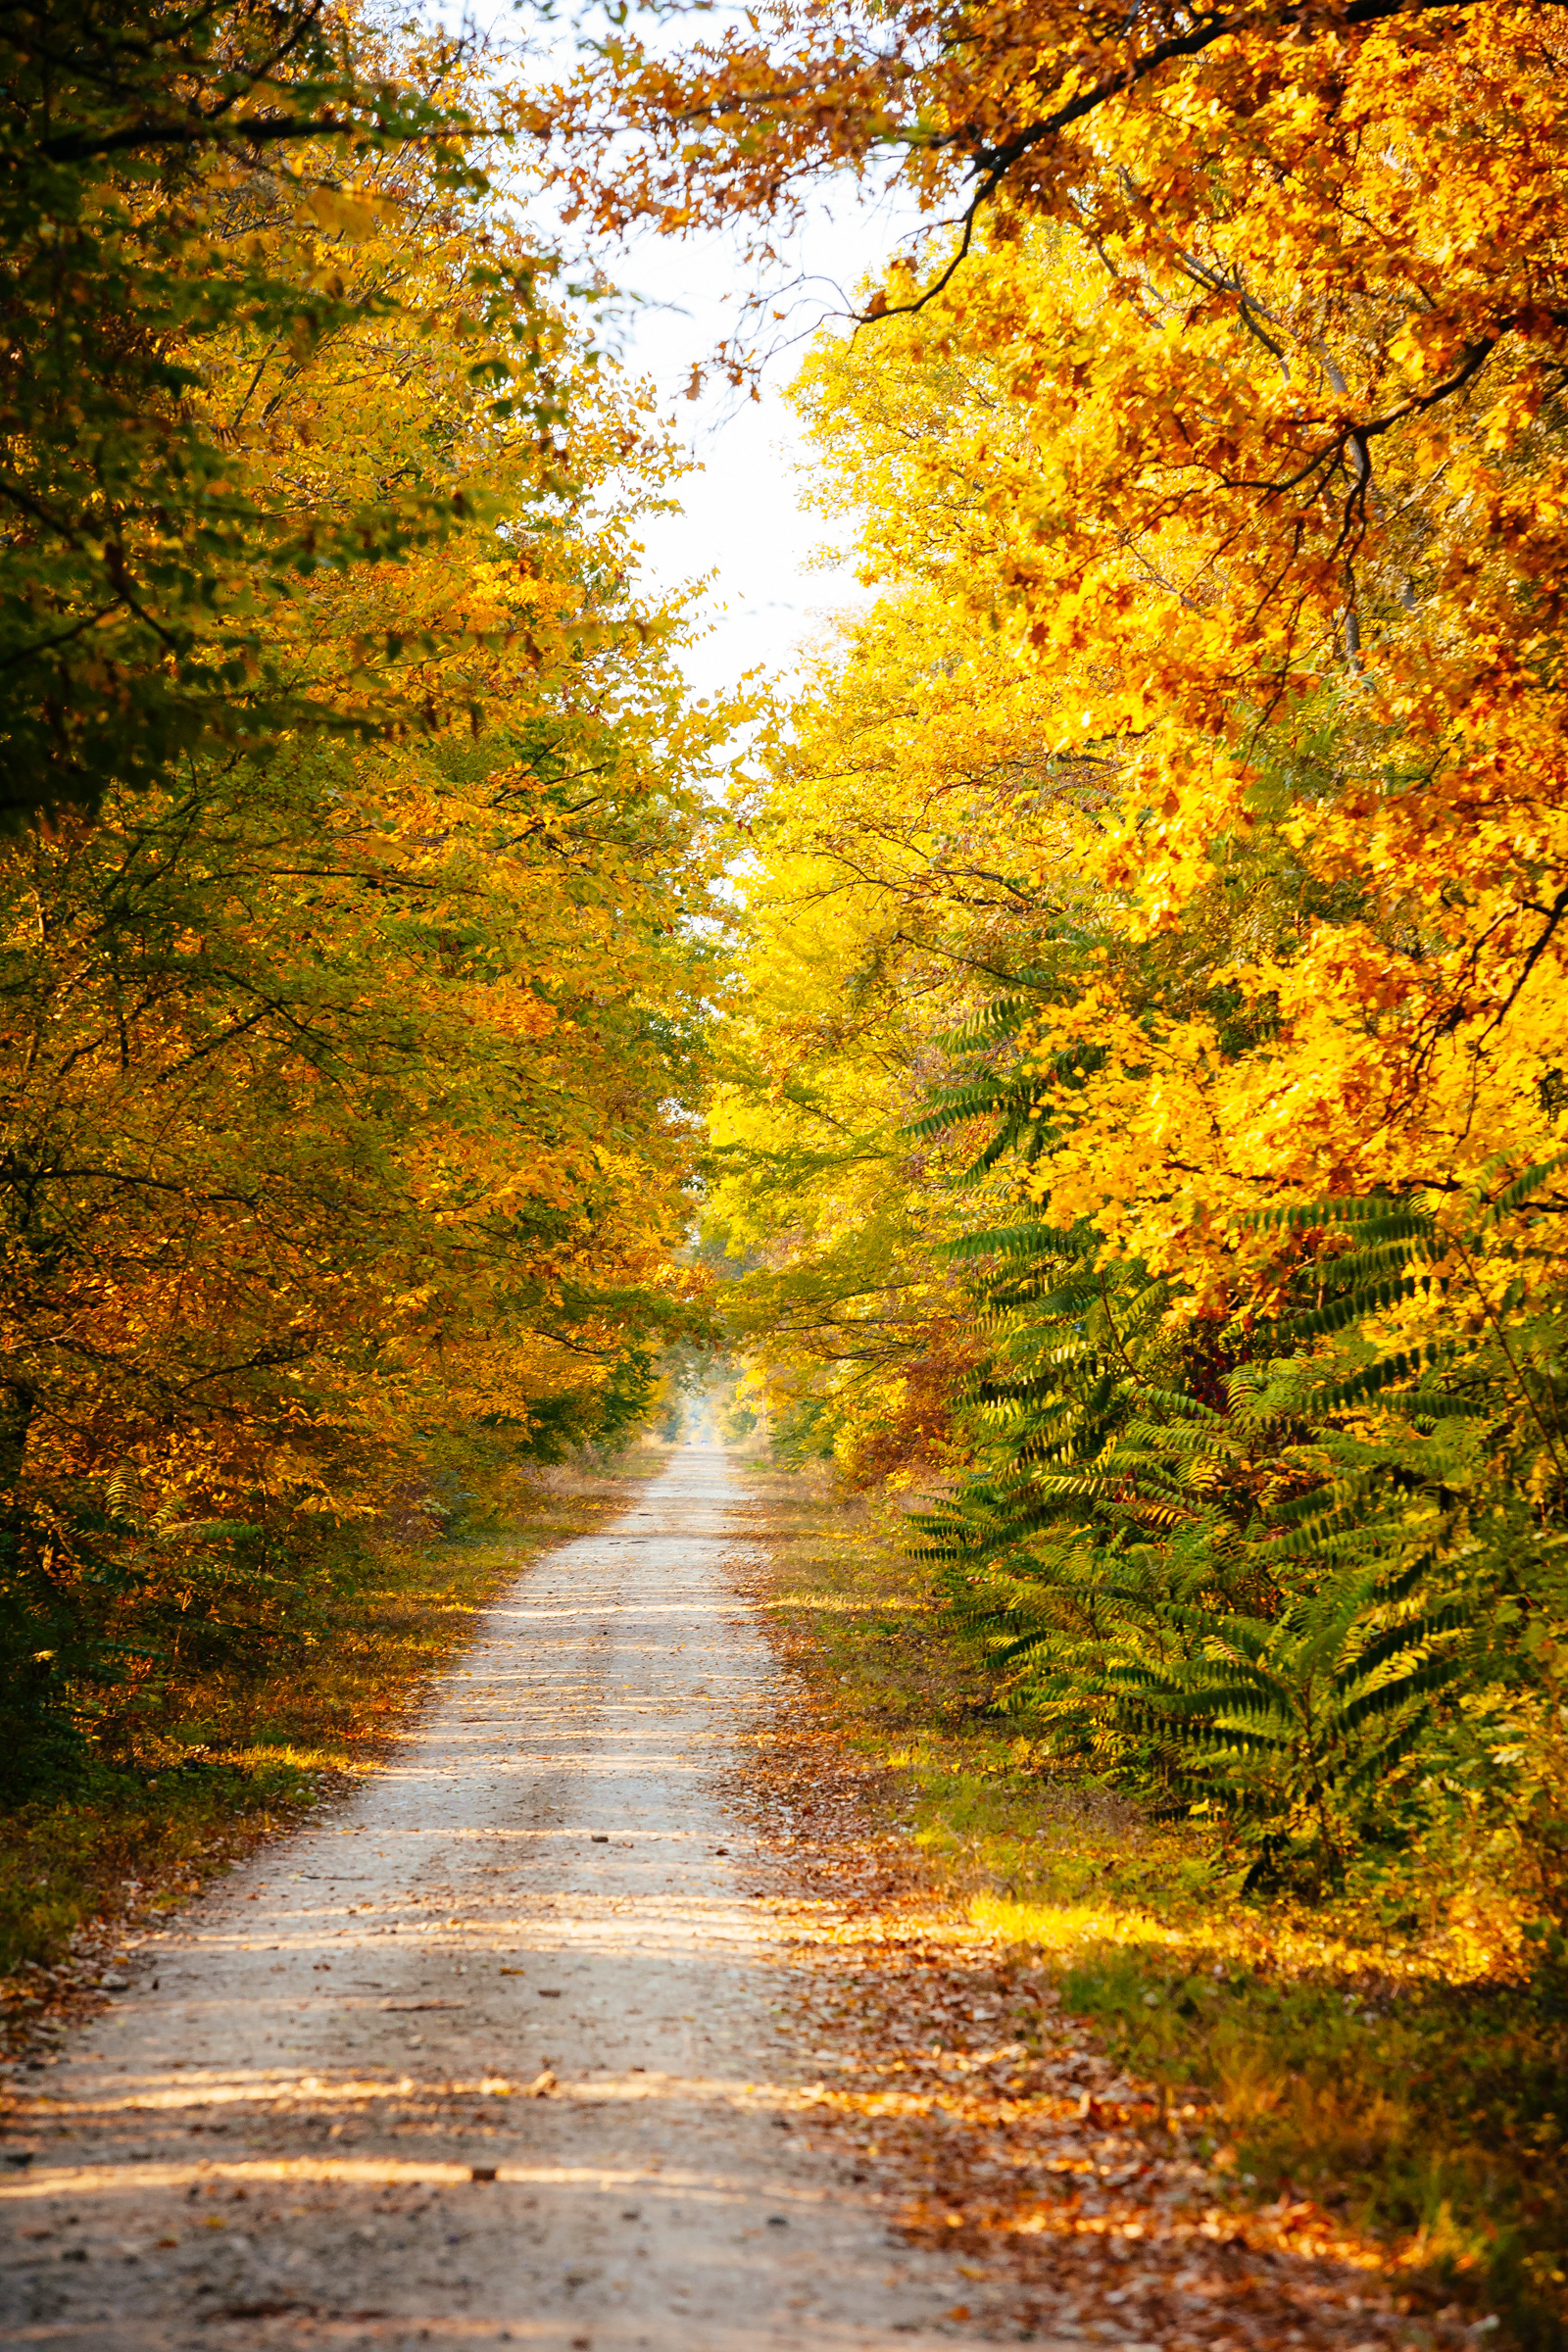 Autumn scenery with a forest road